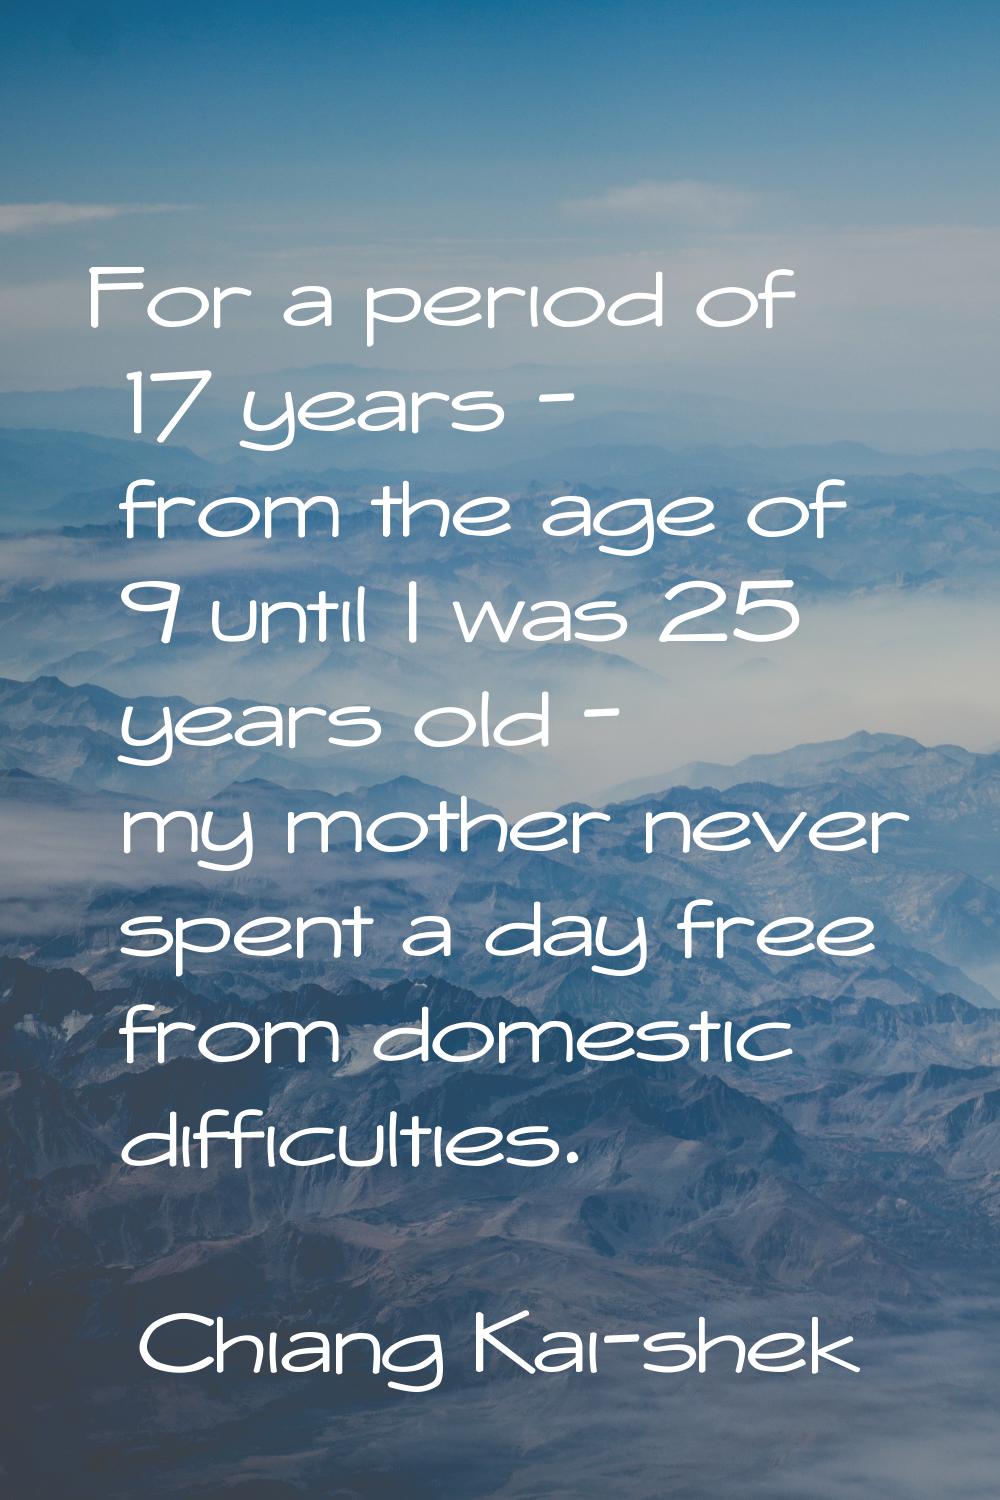 For a period of 17 years - from the age of 9 until I was 25 years old - my mother never spent a day